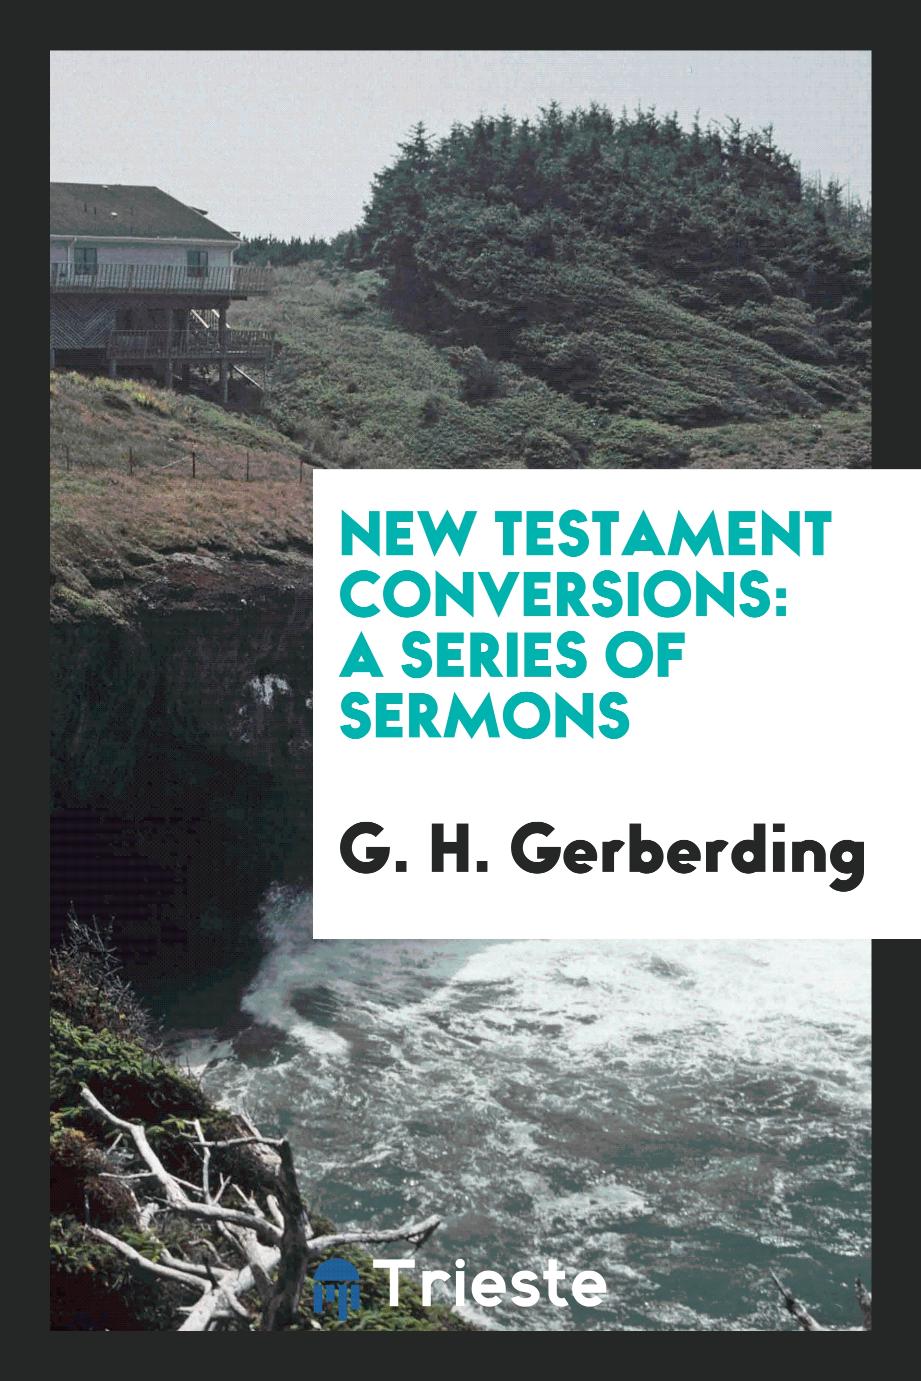 New Testament Conversions: A Series of Sermons